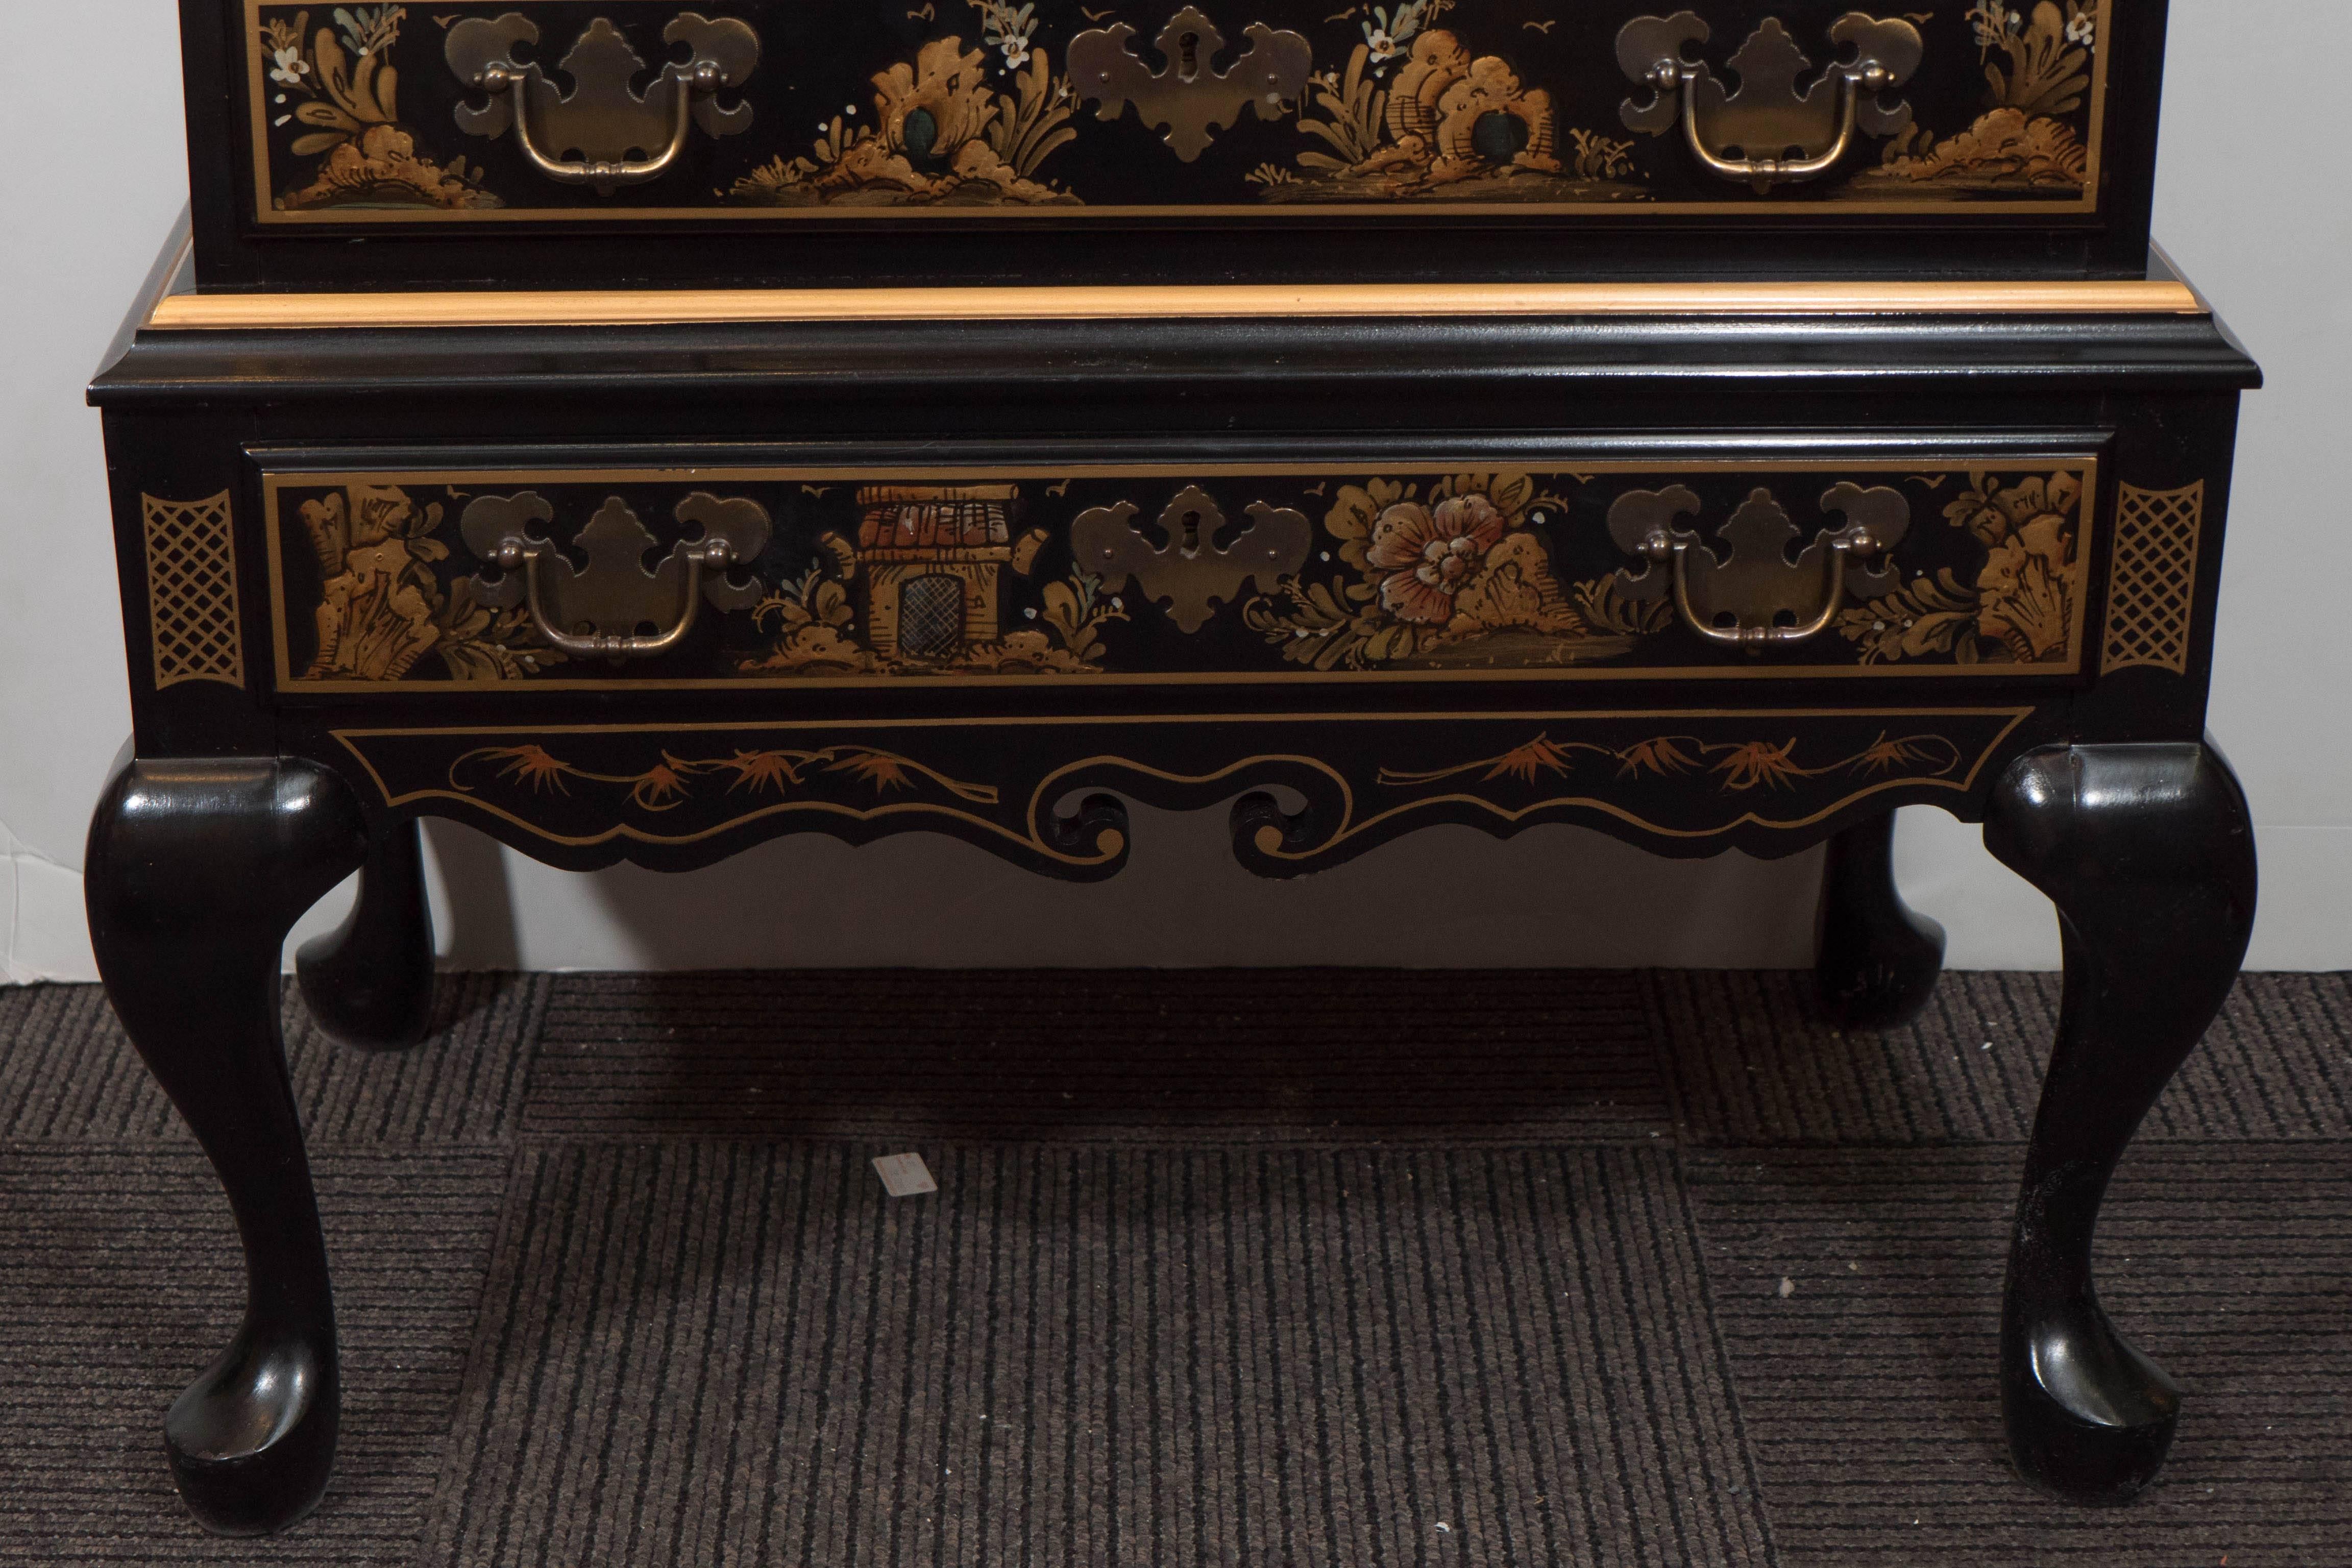 A vintage secretaire desk in black lacquer by Maddox Furniture, designed in the chinoiserie mode, and hand-painted with Asian Motifs. An ornately decorated drop-front (Key provided) with extending lopers, opens to reveal a writing space with five